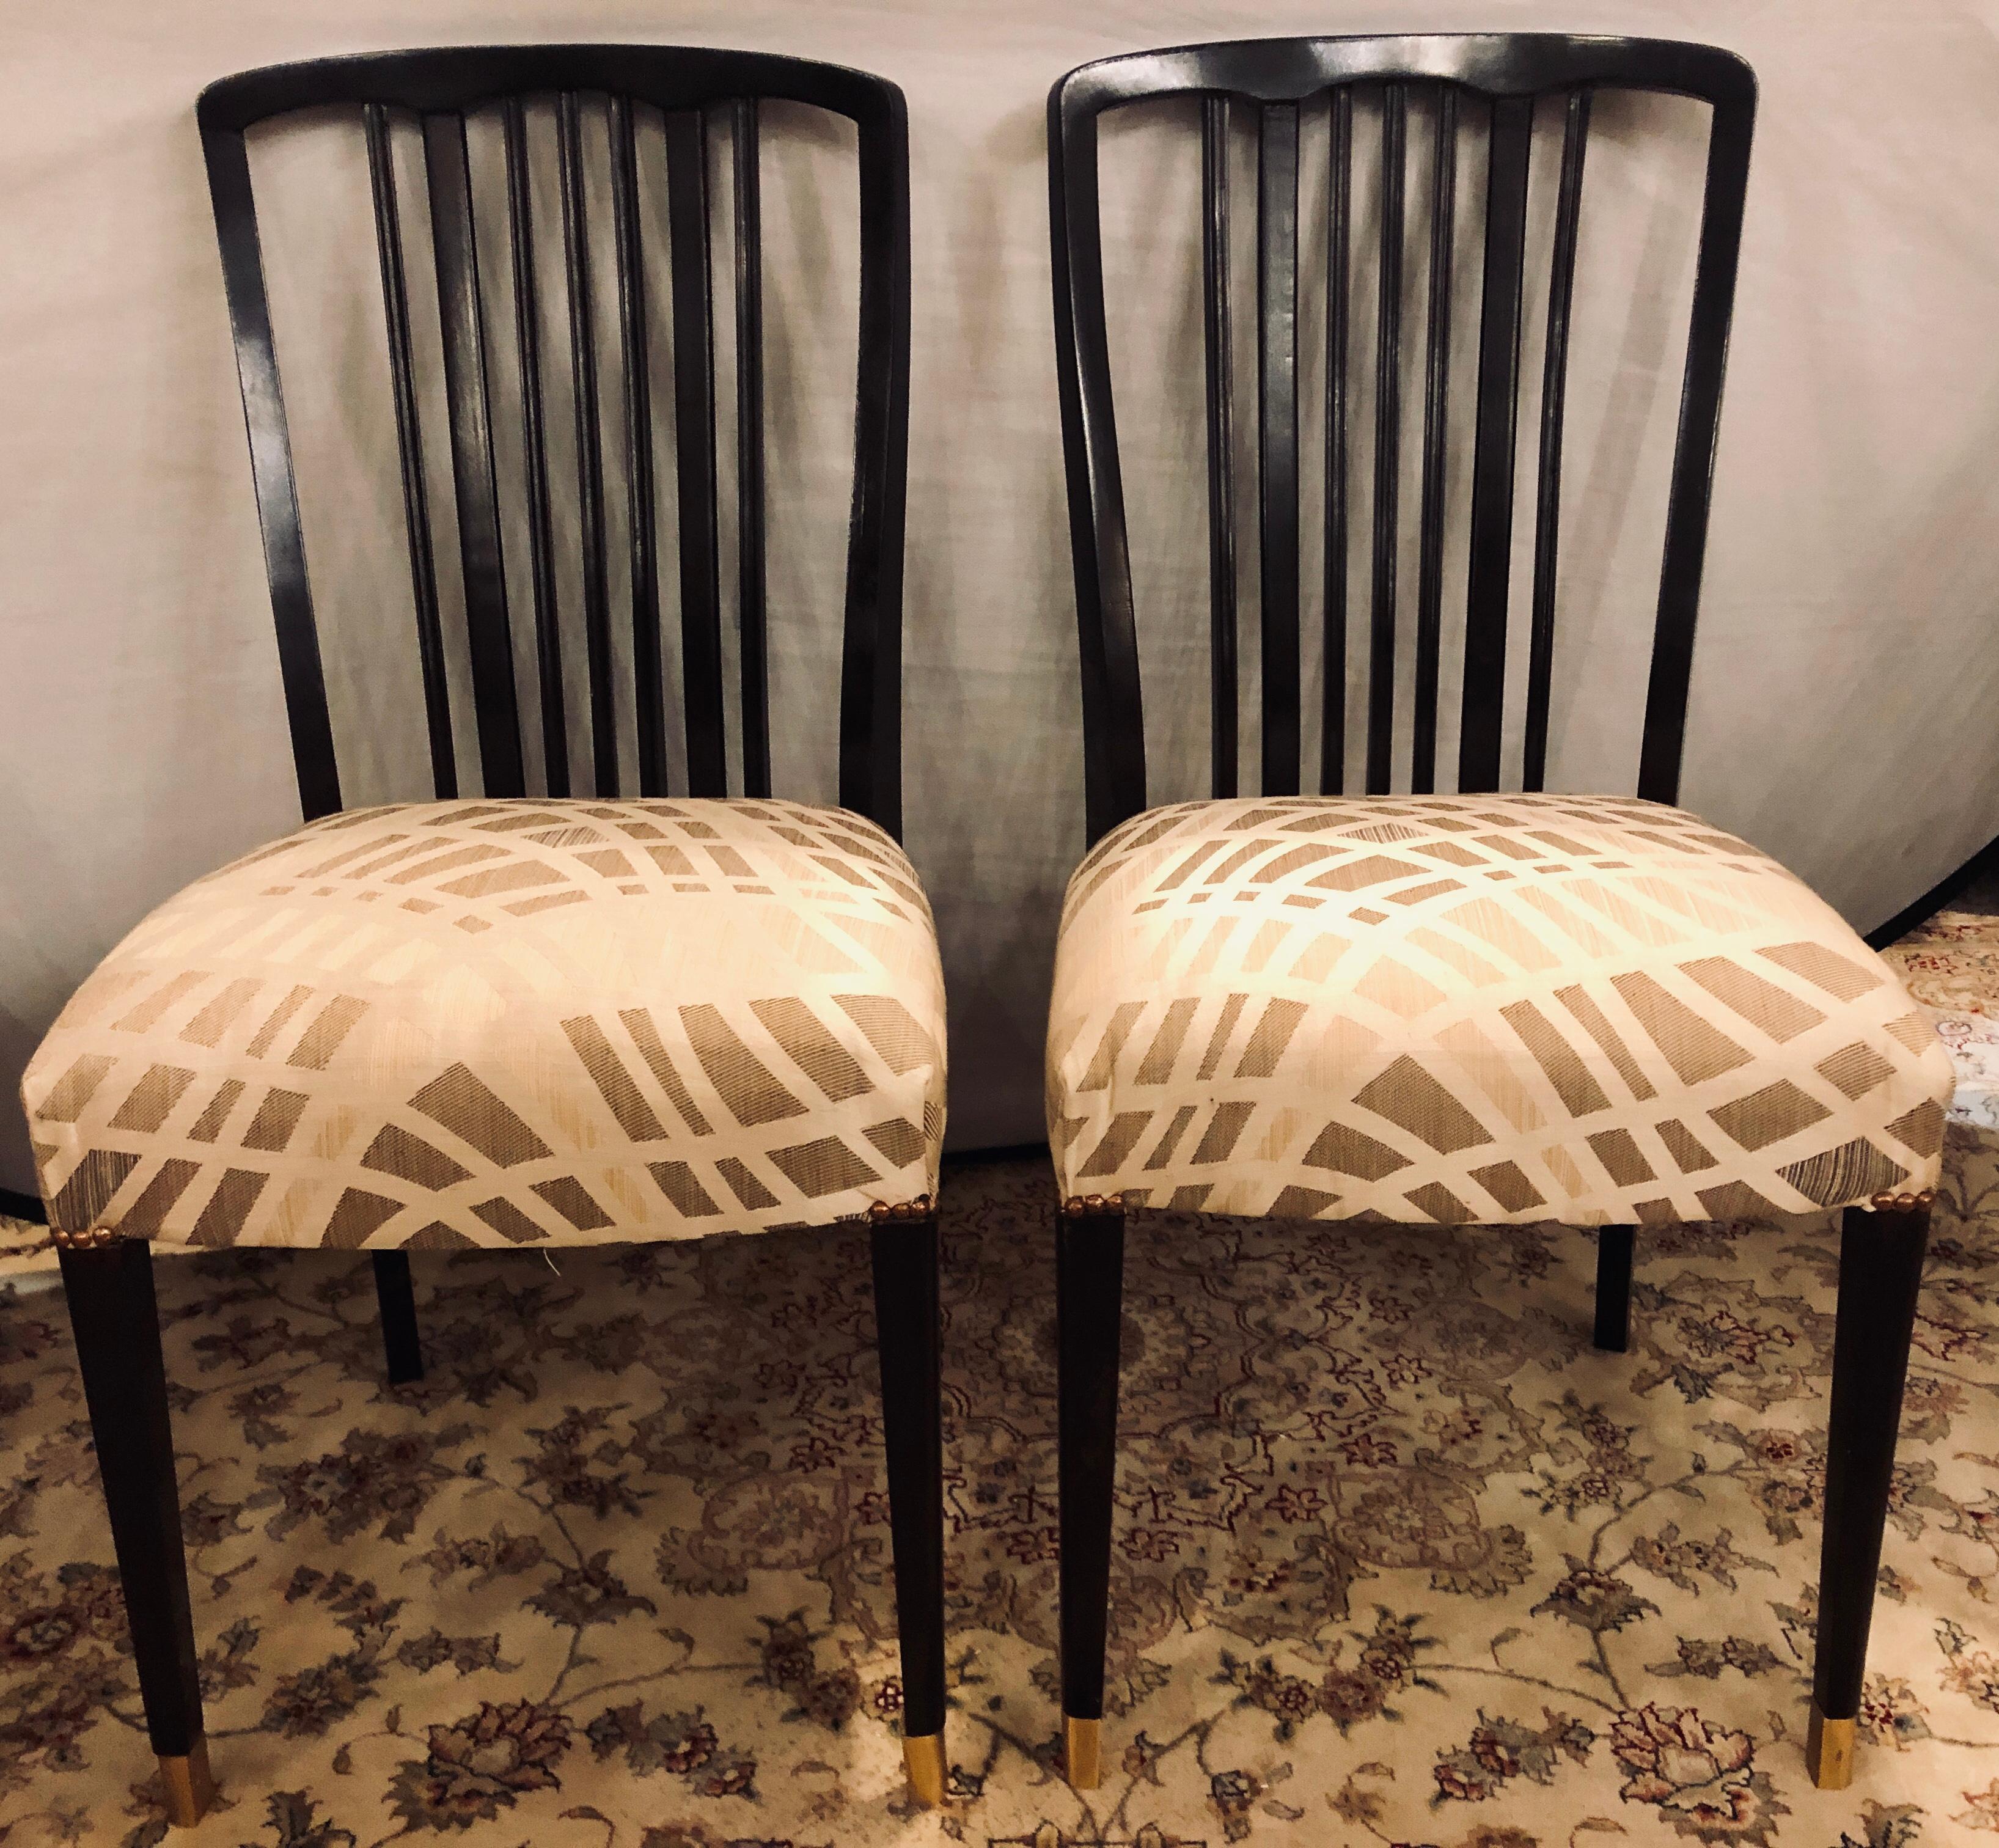 Set of 24 Georg Kofoed Scandinavian Modern ebony or rosewood dining chairs. Can purchase as many as are needed from this long and hard to find set of twenty-four. Mid-Century Modern at its peck. This fully hand rubbed French polished and newly